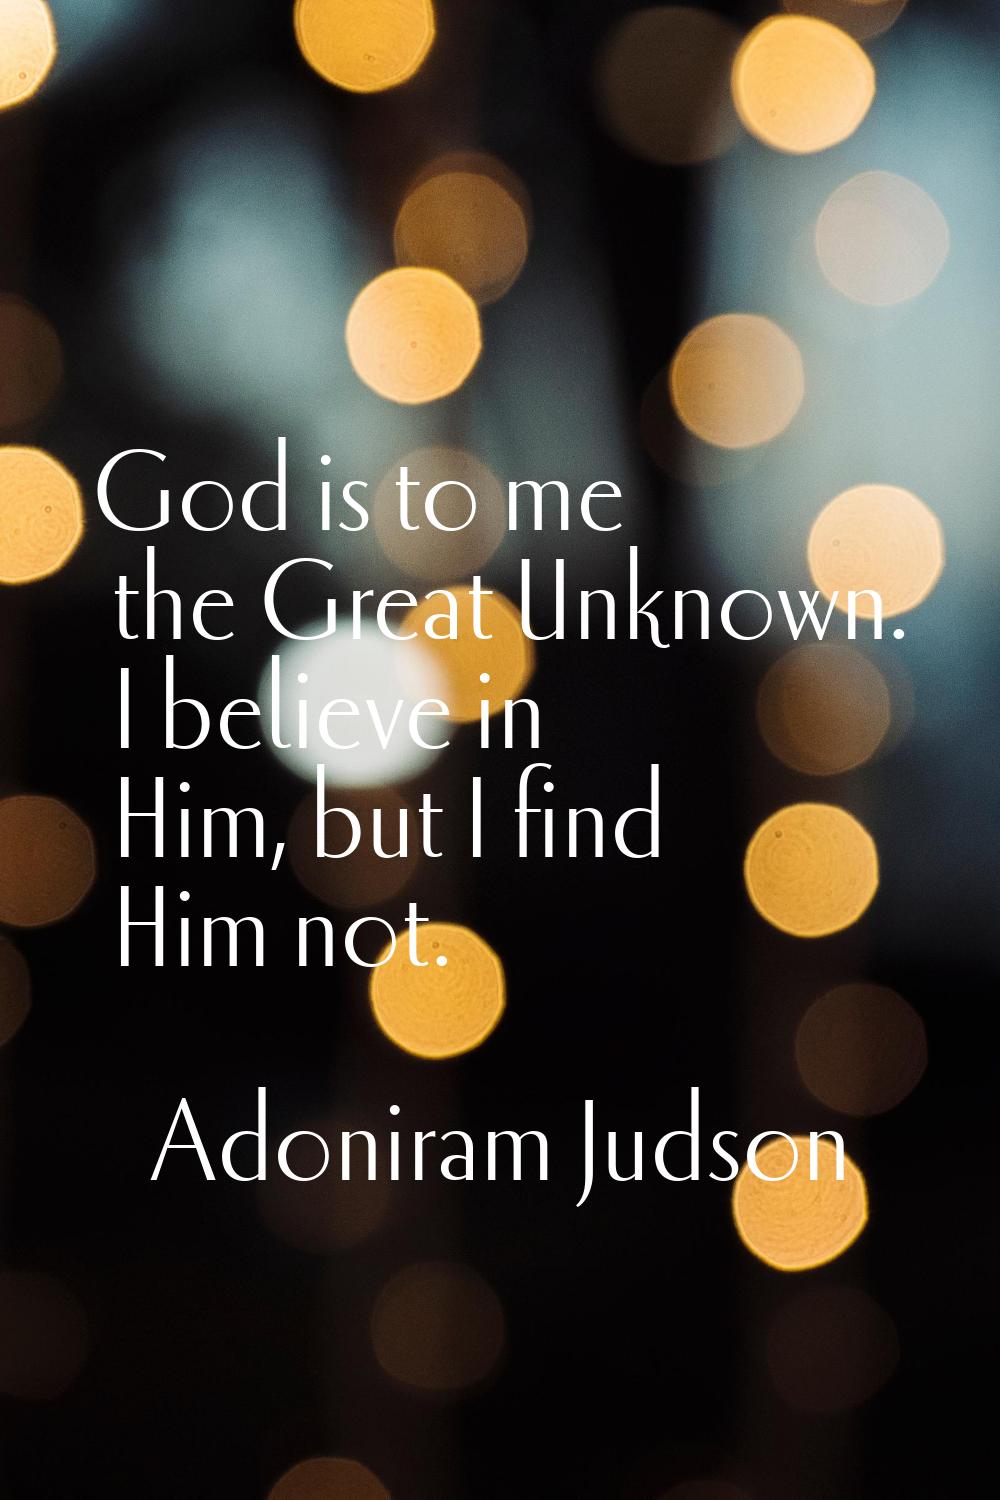 God is to me the Great Unknown. I believe in Him, but I find Him not.